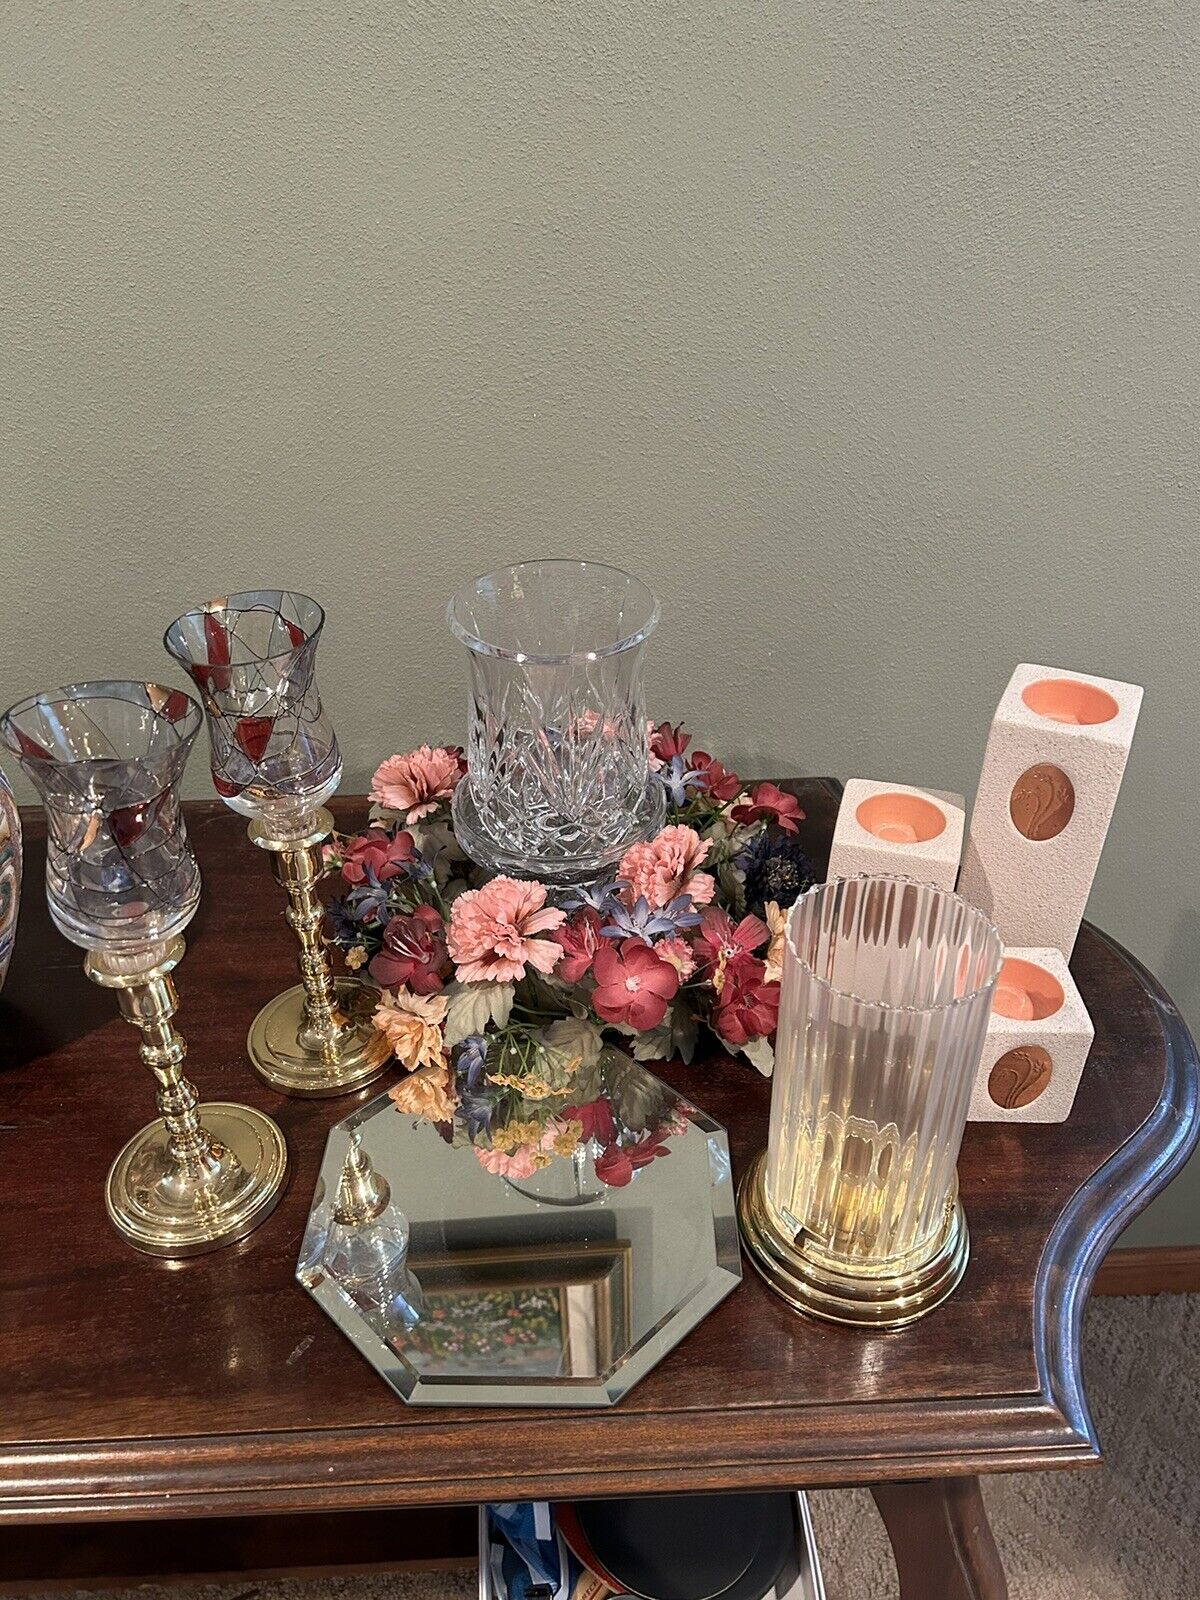 PartyLite Candle Holder Collection